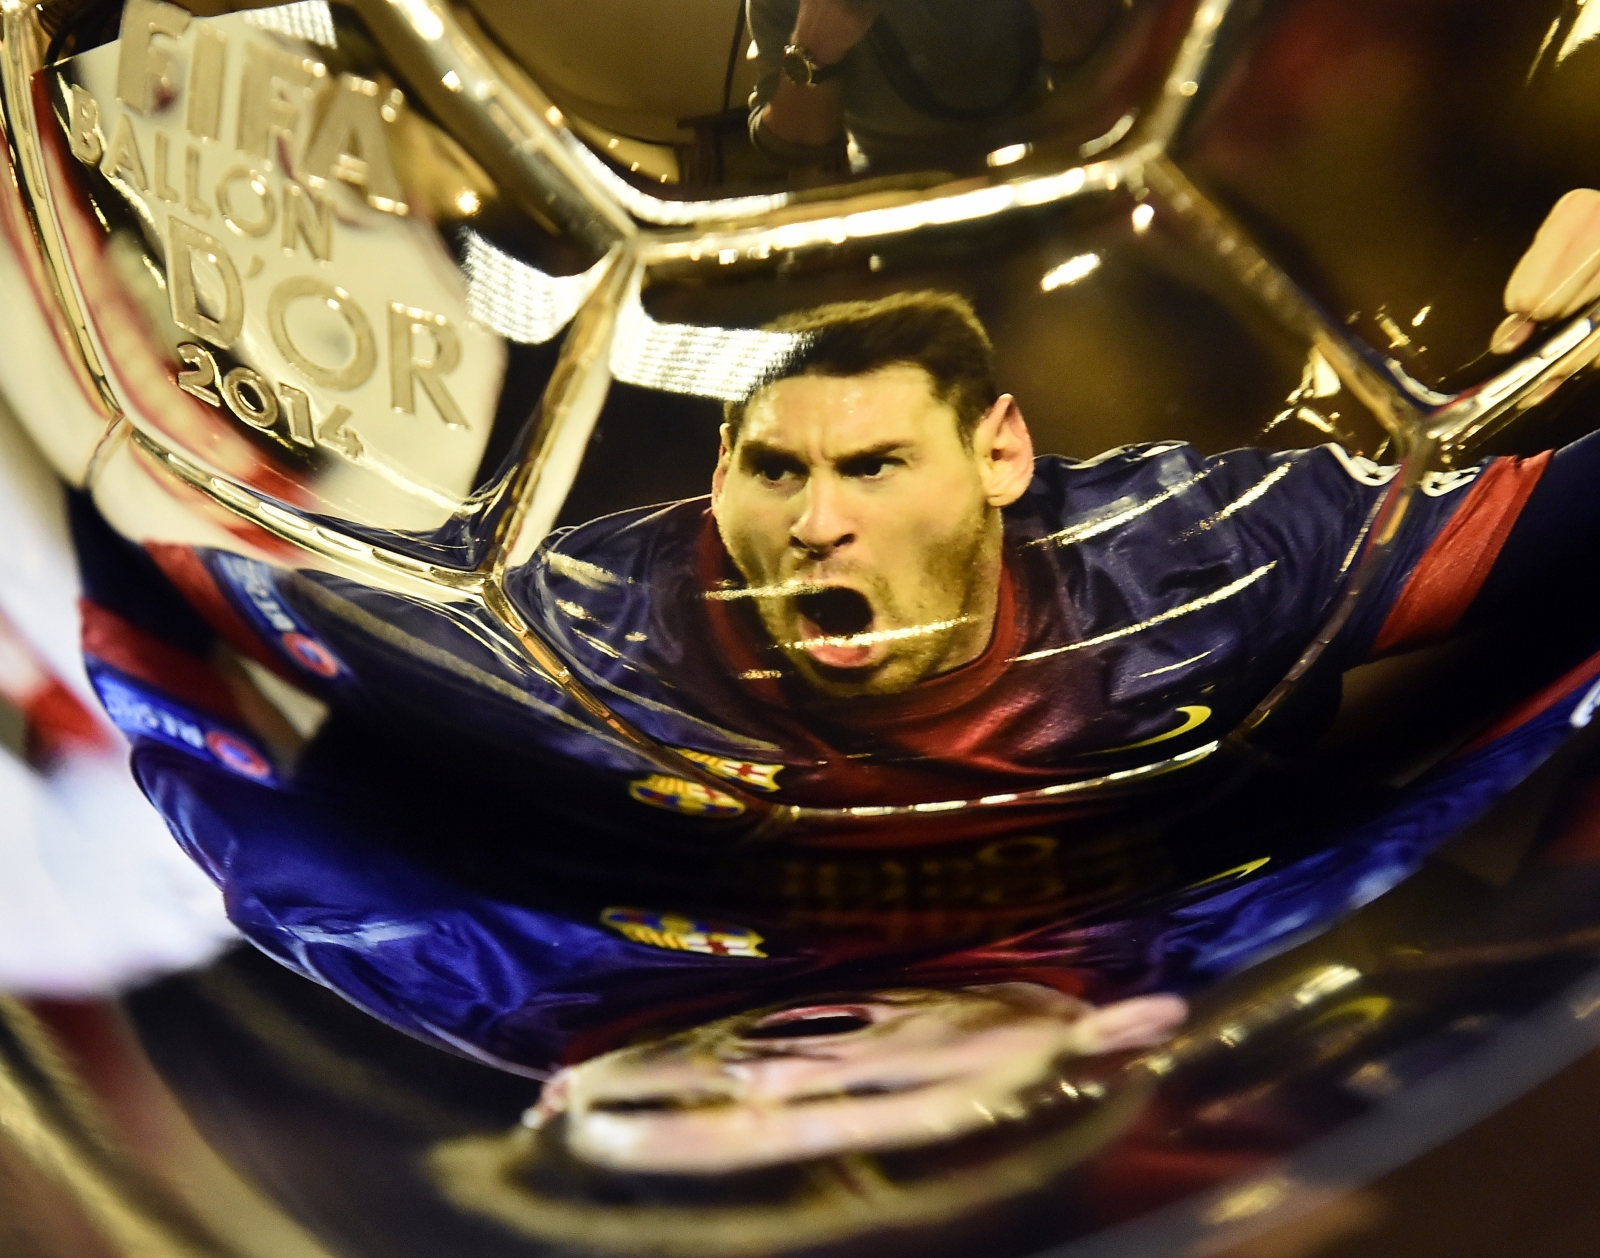 2014 Fifa Ballon d'Or ceremony as it happened